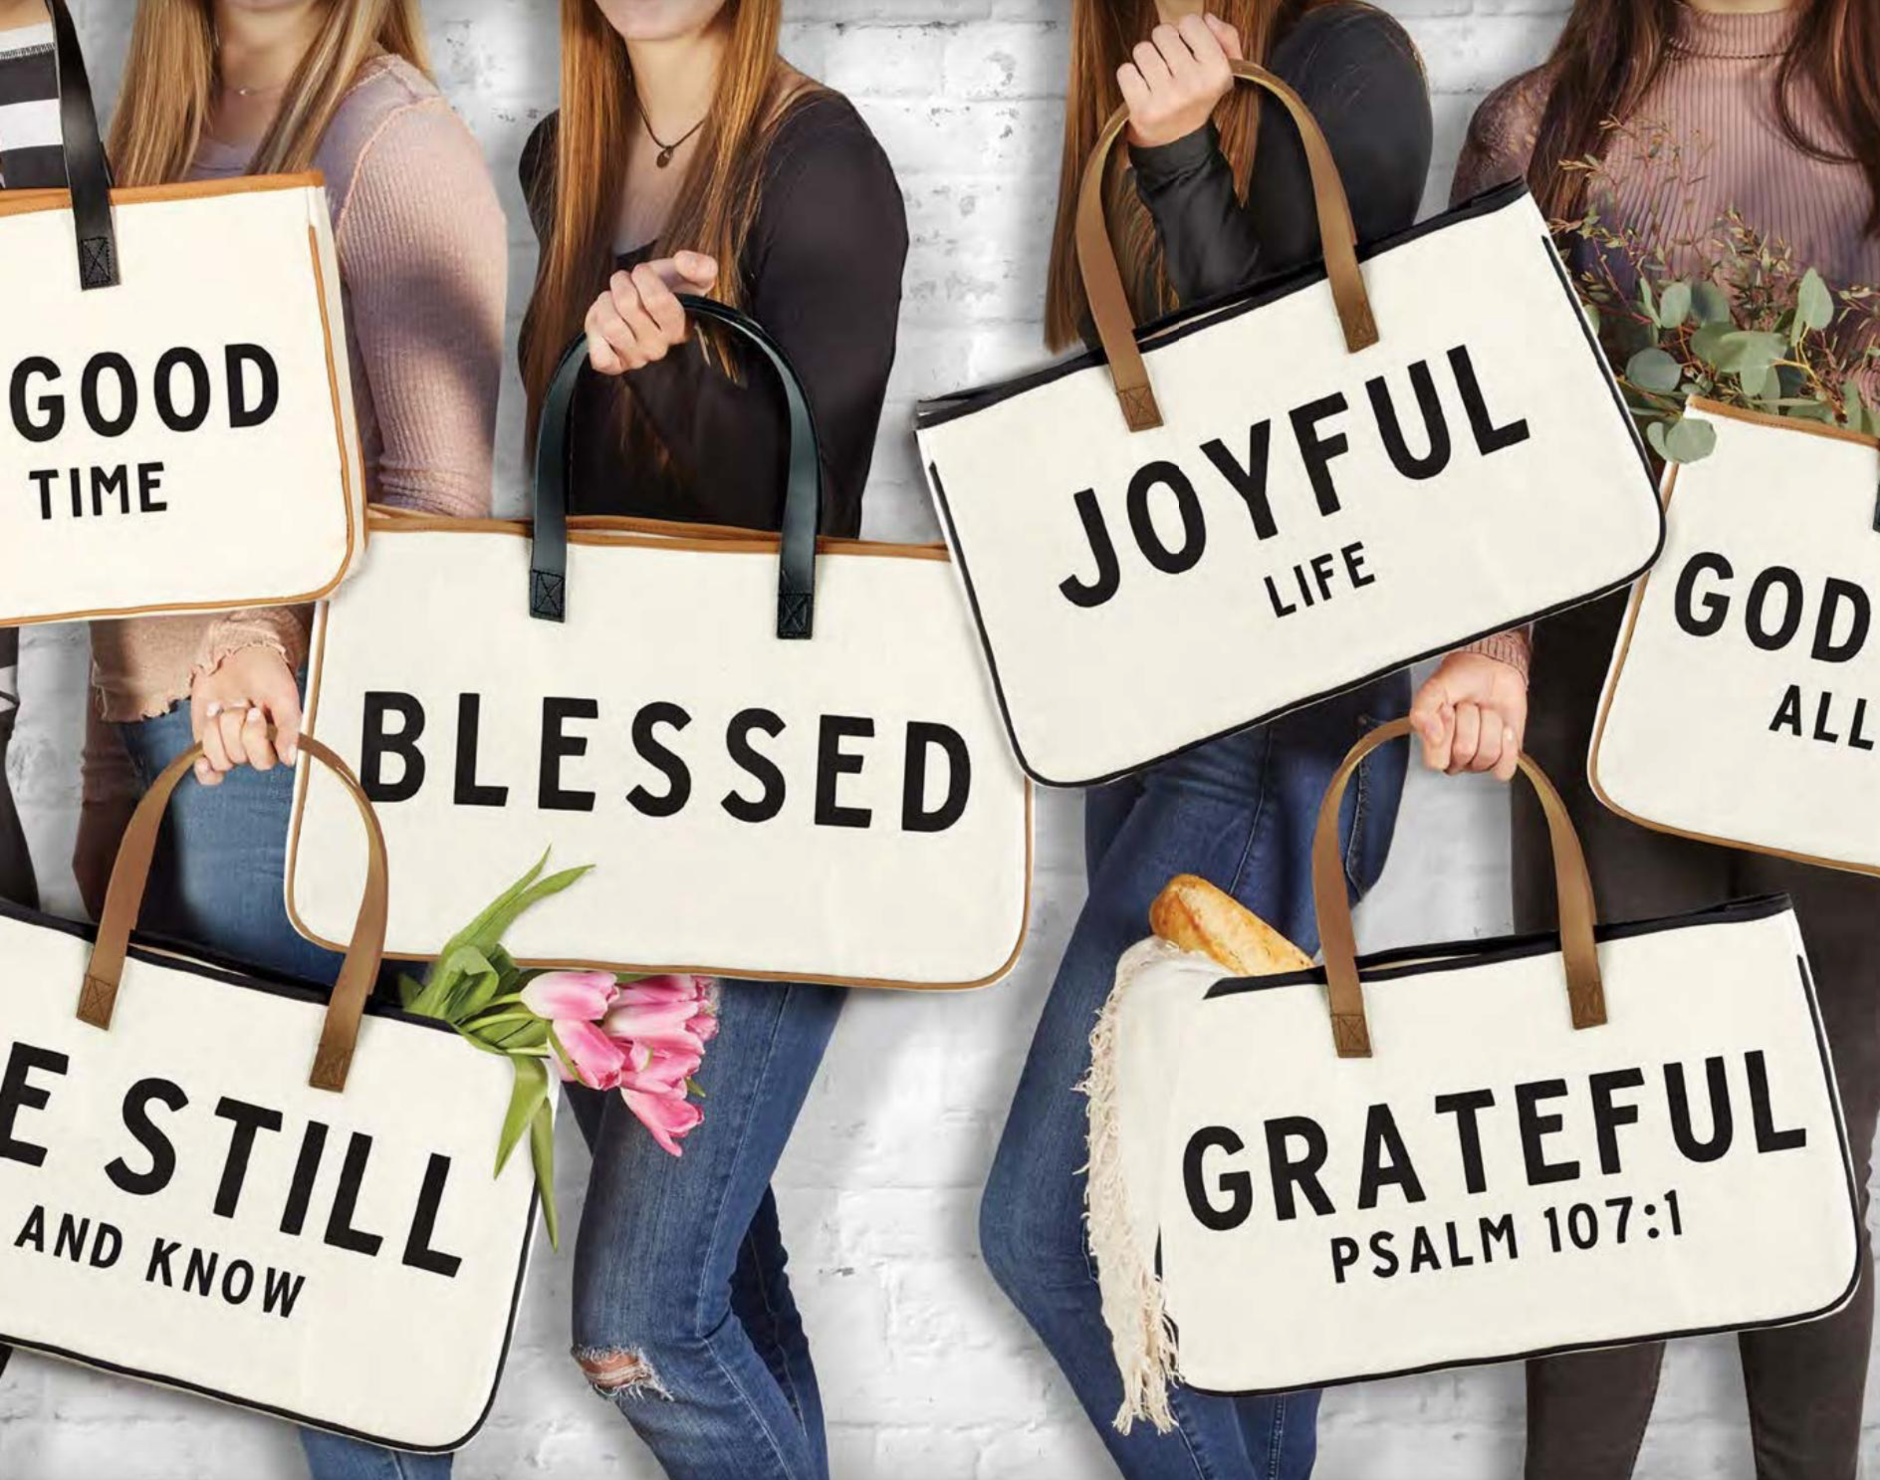 clothing bag for travel | large tote bags | grocery bag tote | christian bags and totes | inspirational totes | Christian fashion | joyful tote bag | Faith gifts | Christian gifts 